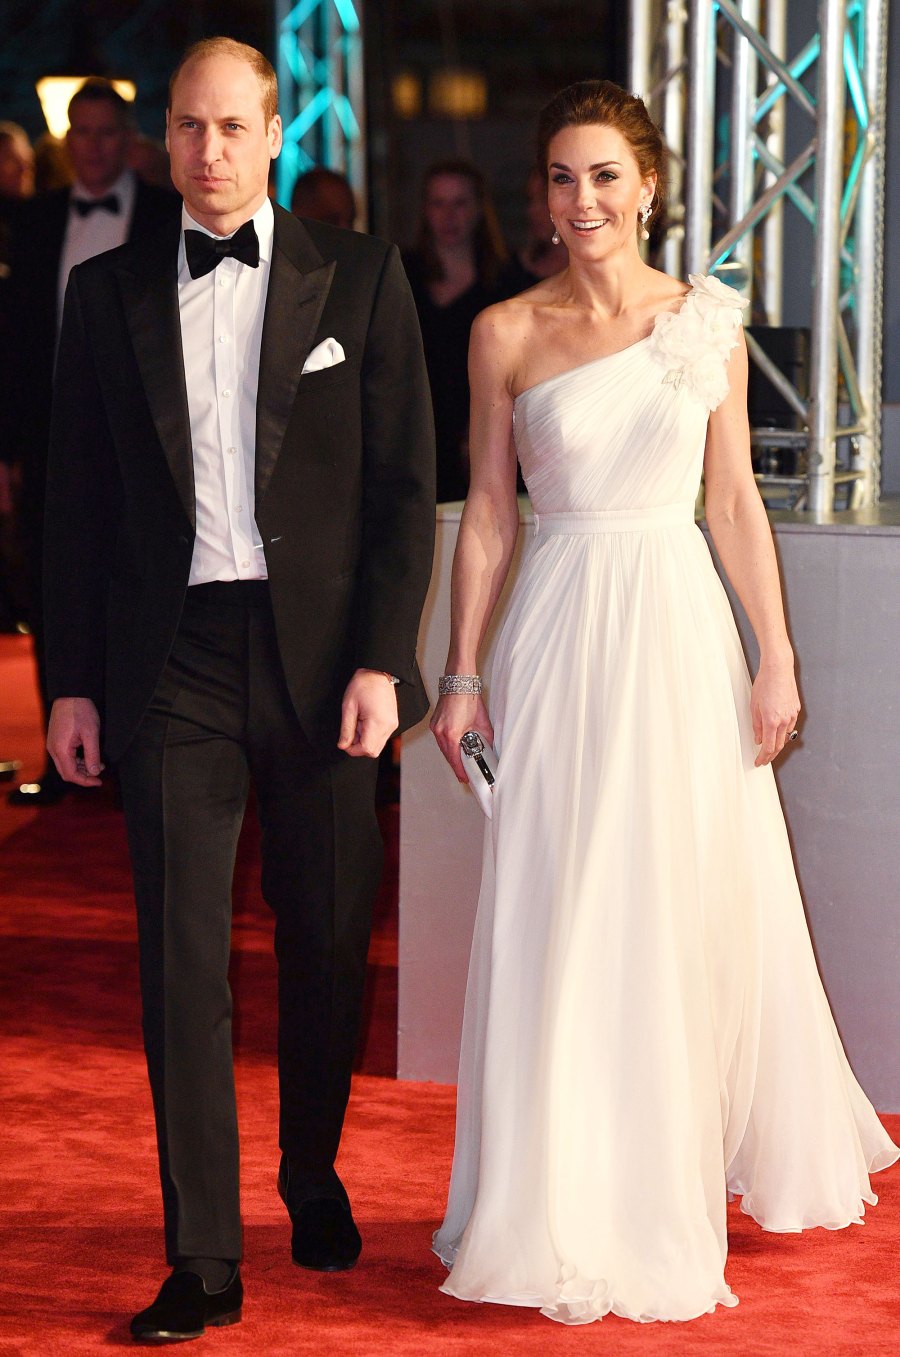 Kate Middleton and Prince William at Every BAFTAs Red Carpet: Pics